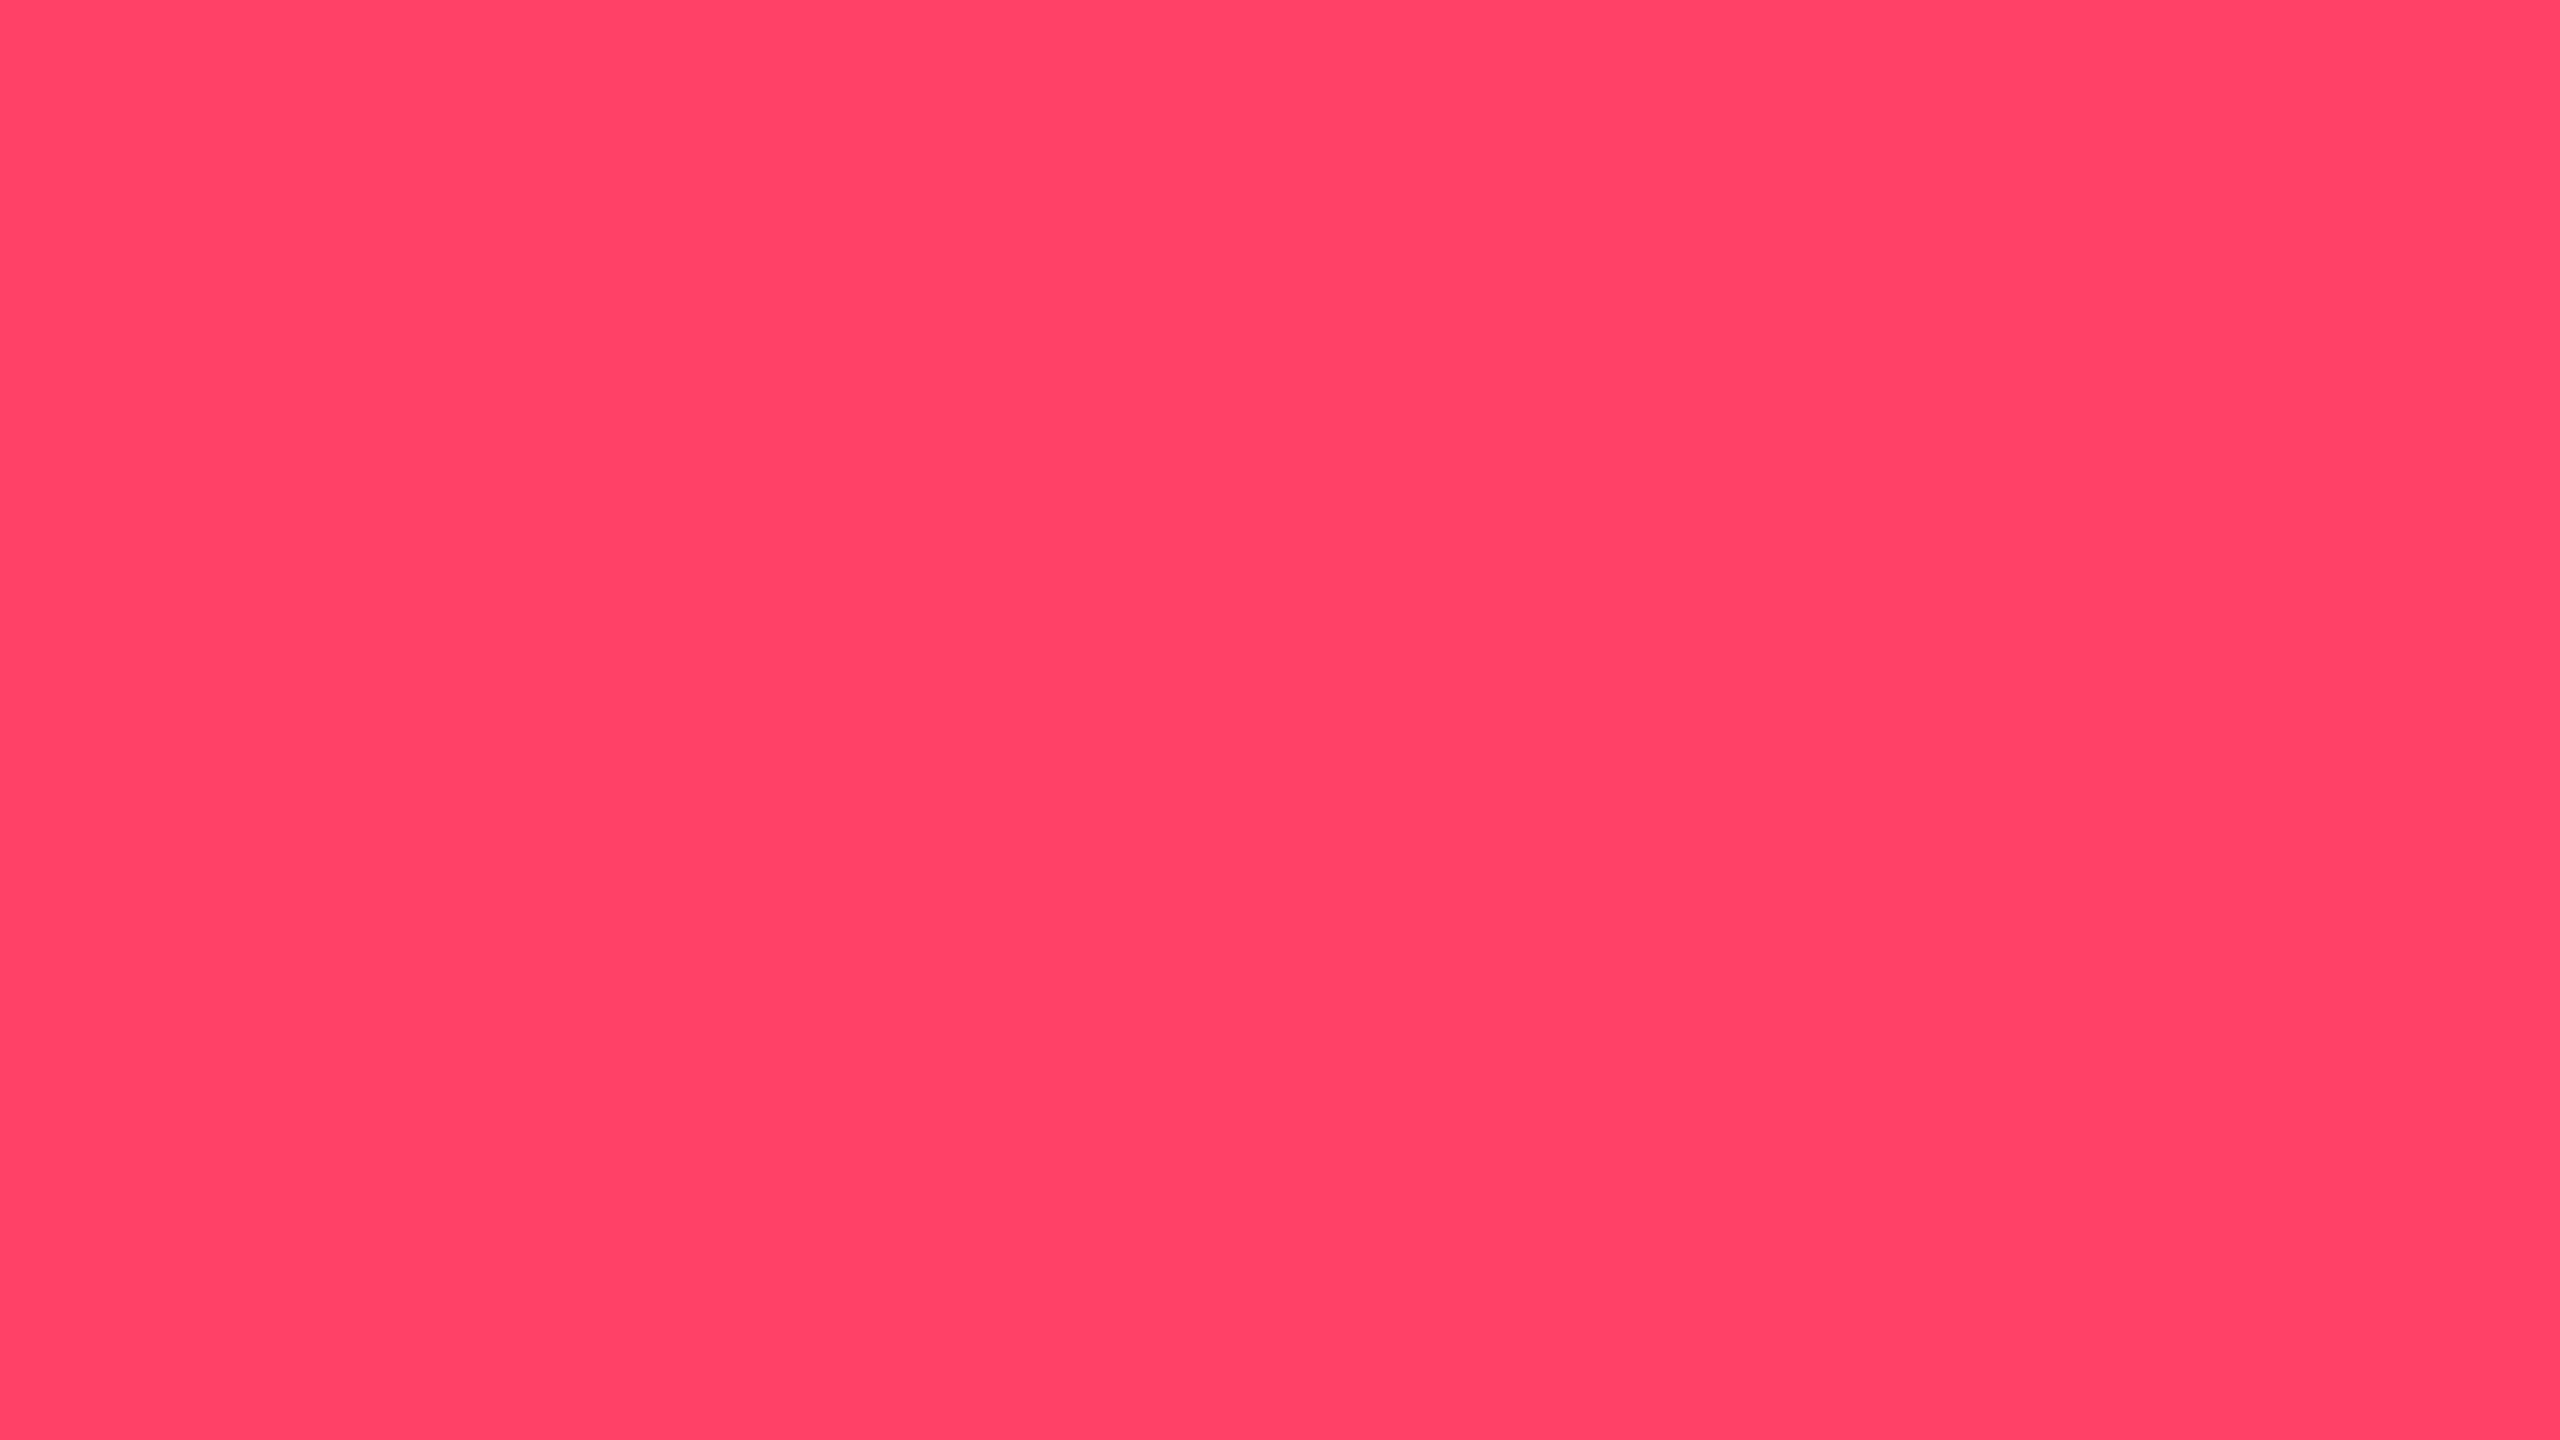 Free 2560x1440 resolution Neon Fuchsia solid color background view